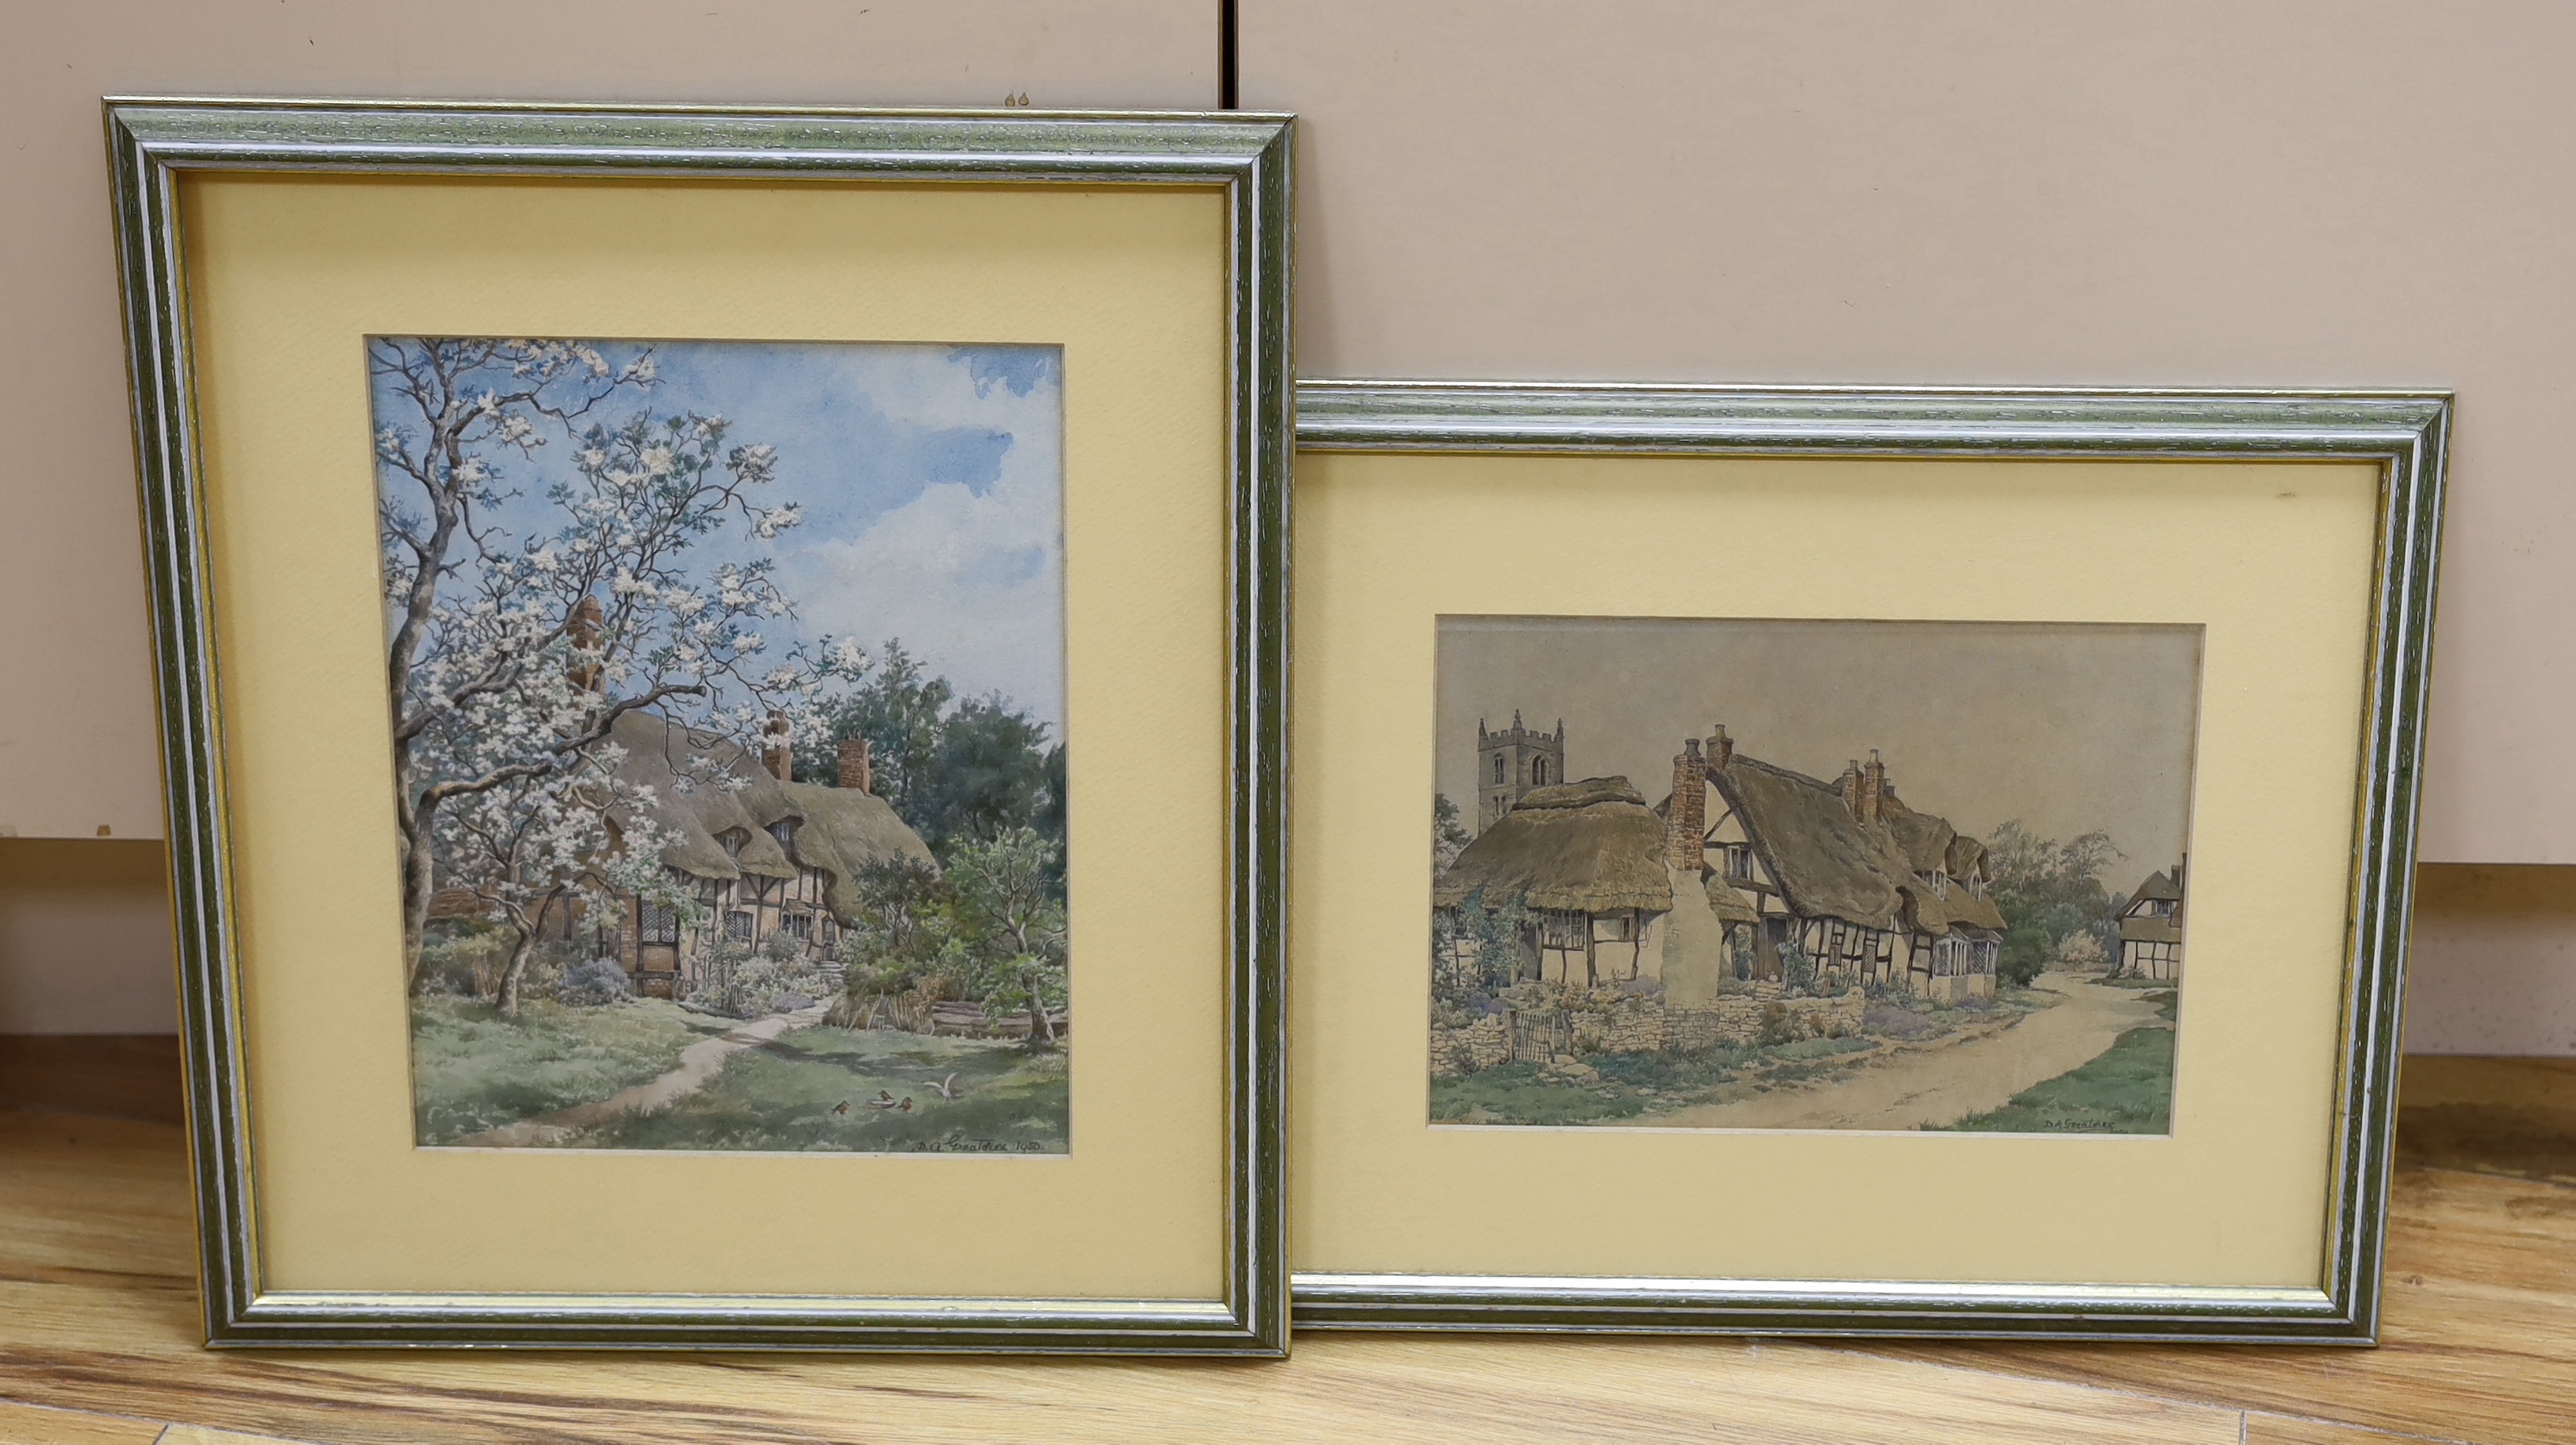 D. A. Greatorex (fl.1900-1930), two watercolours, Thatched cottages, each signed and dated 1950, largest 28 x 23cm